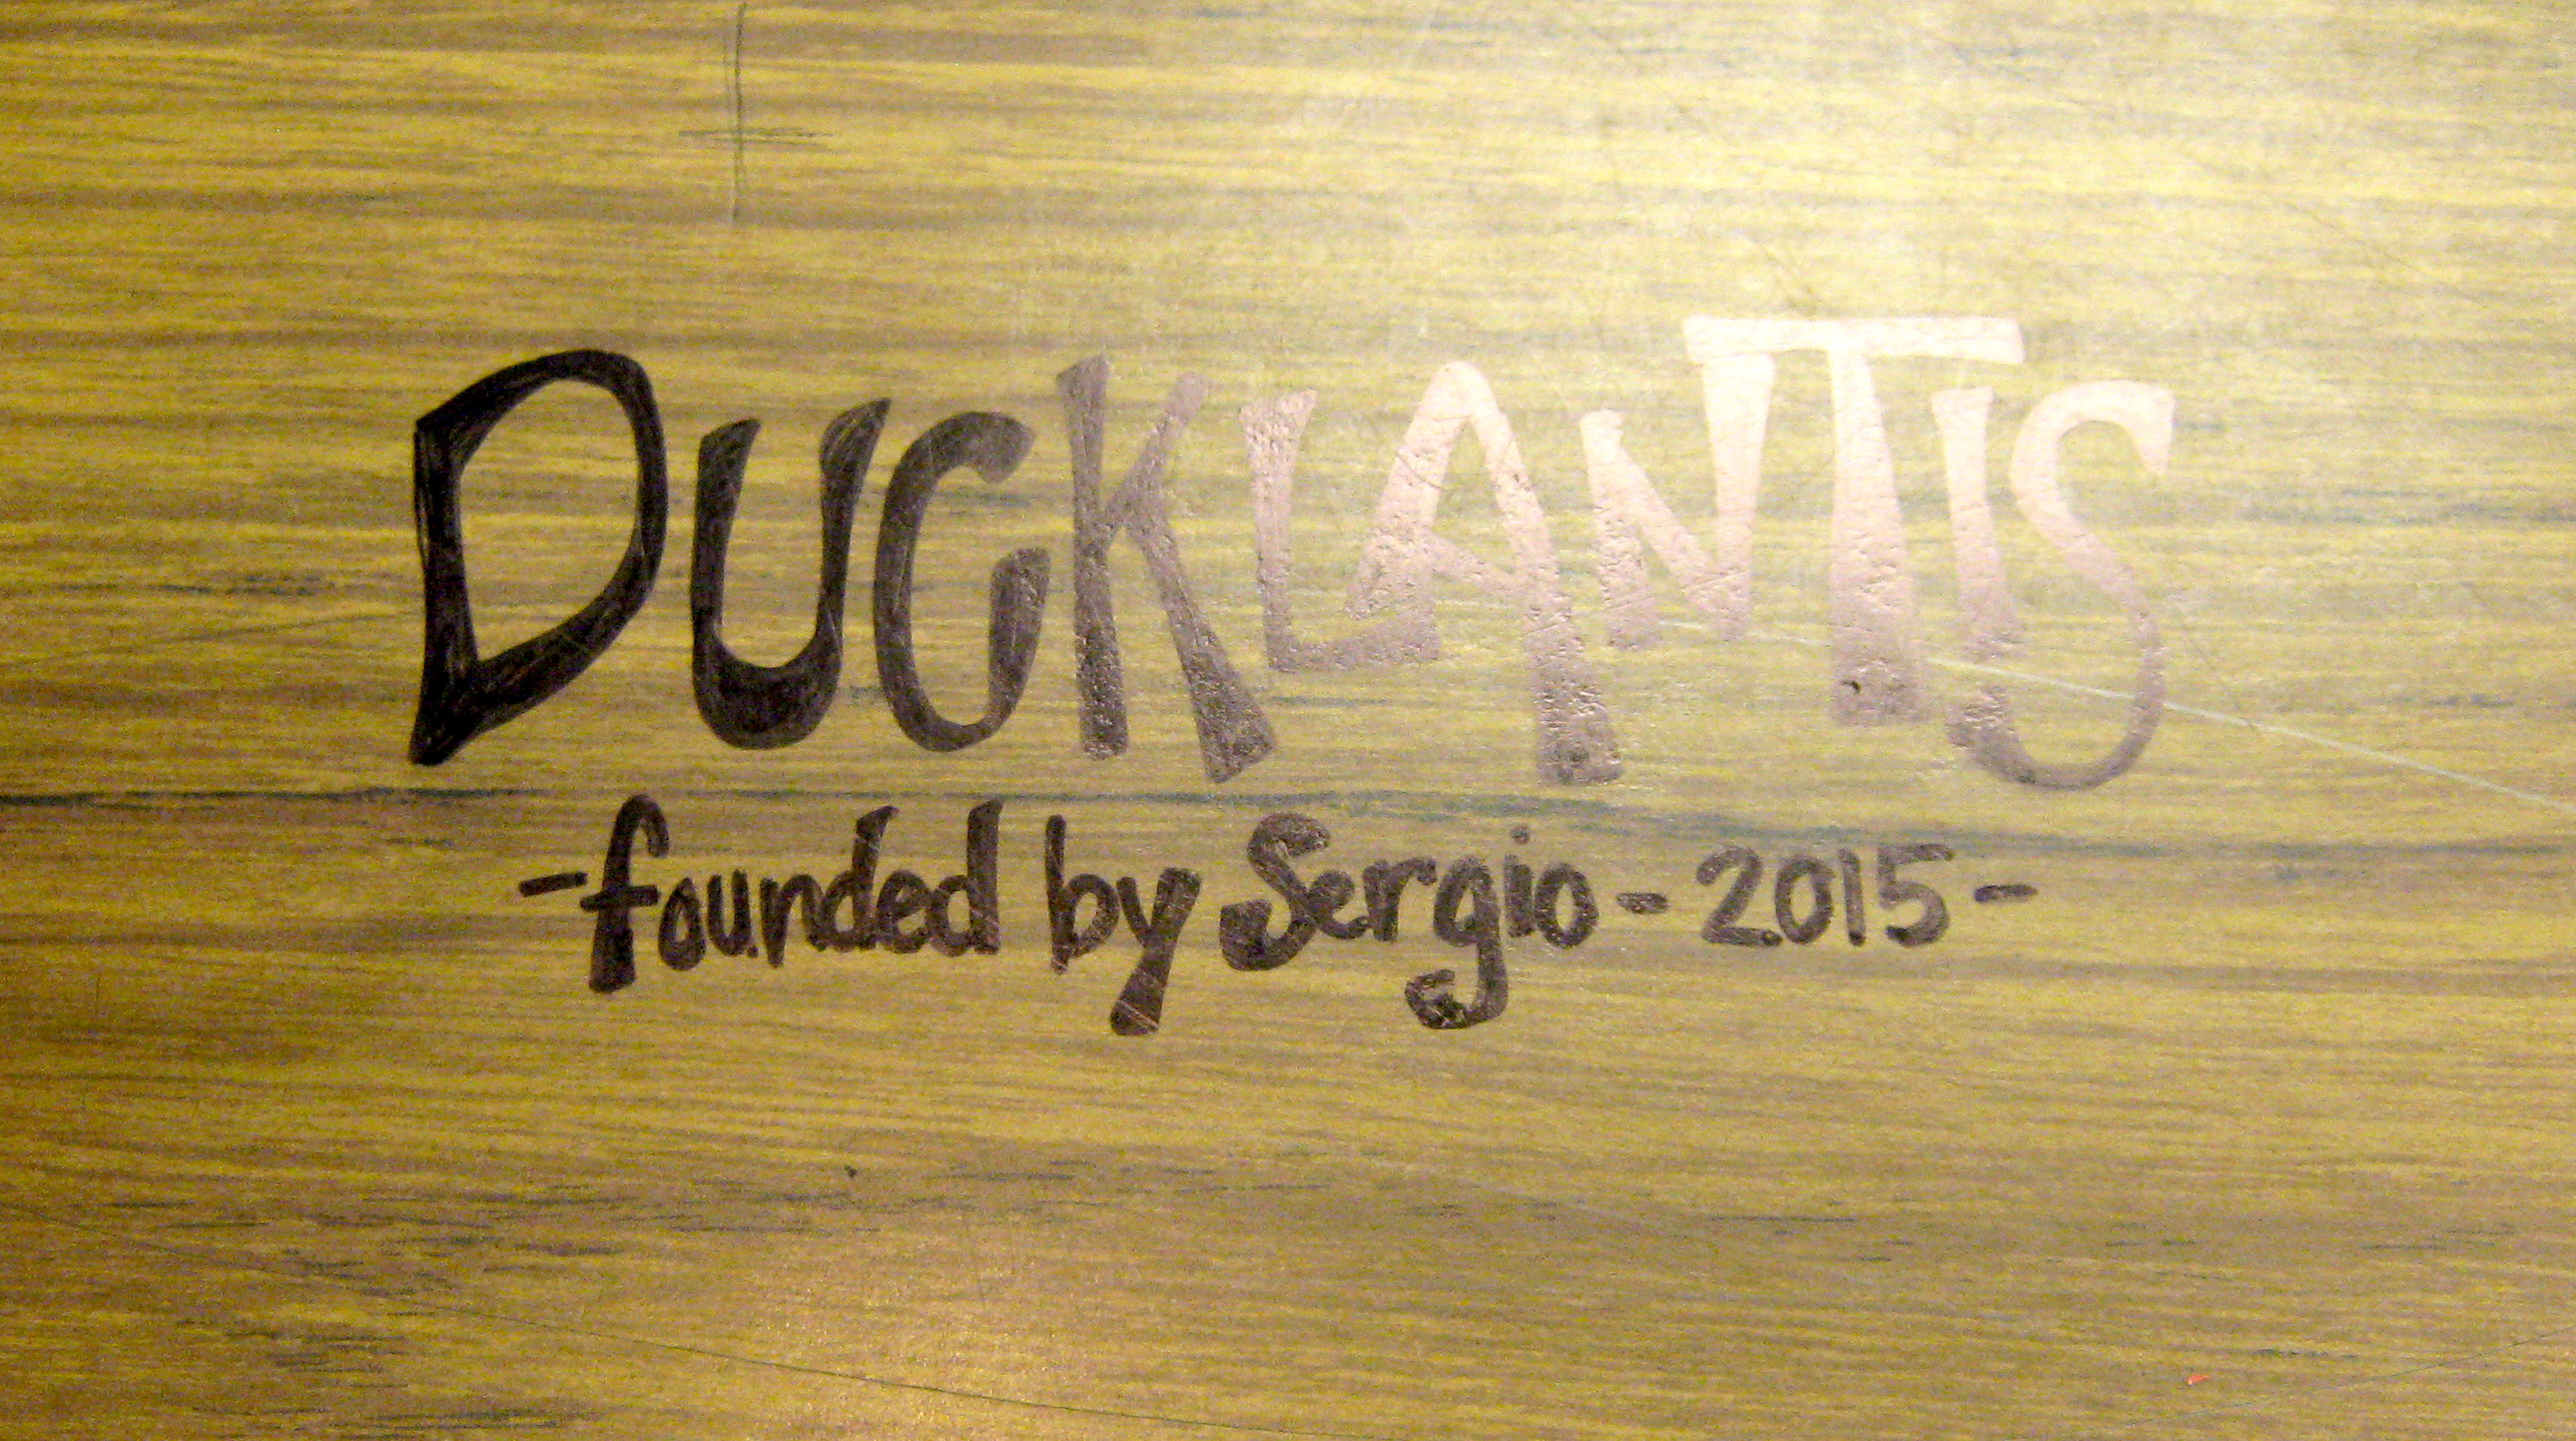 desk with word Ducklantis written on it